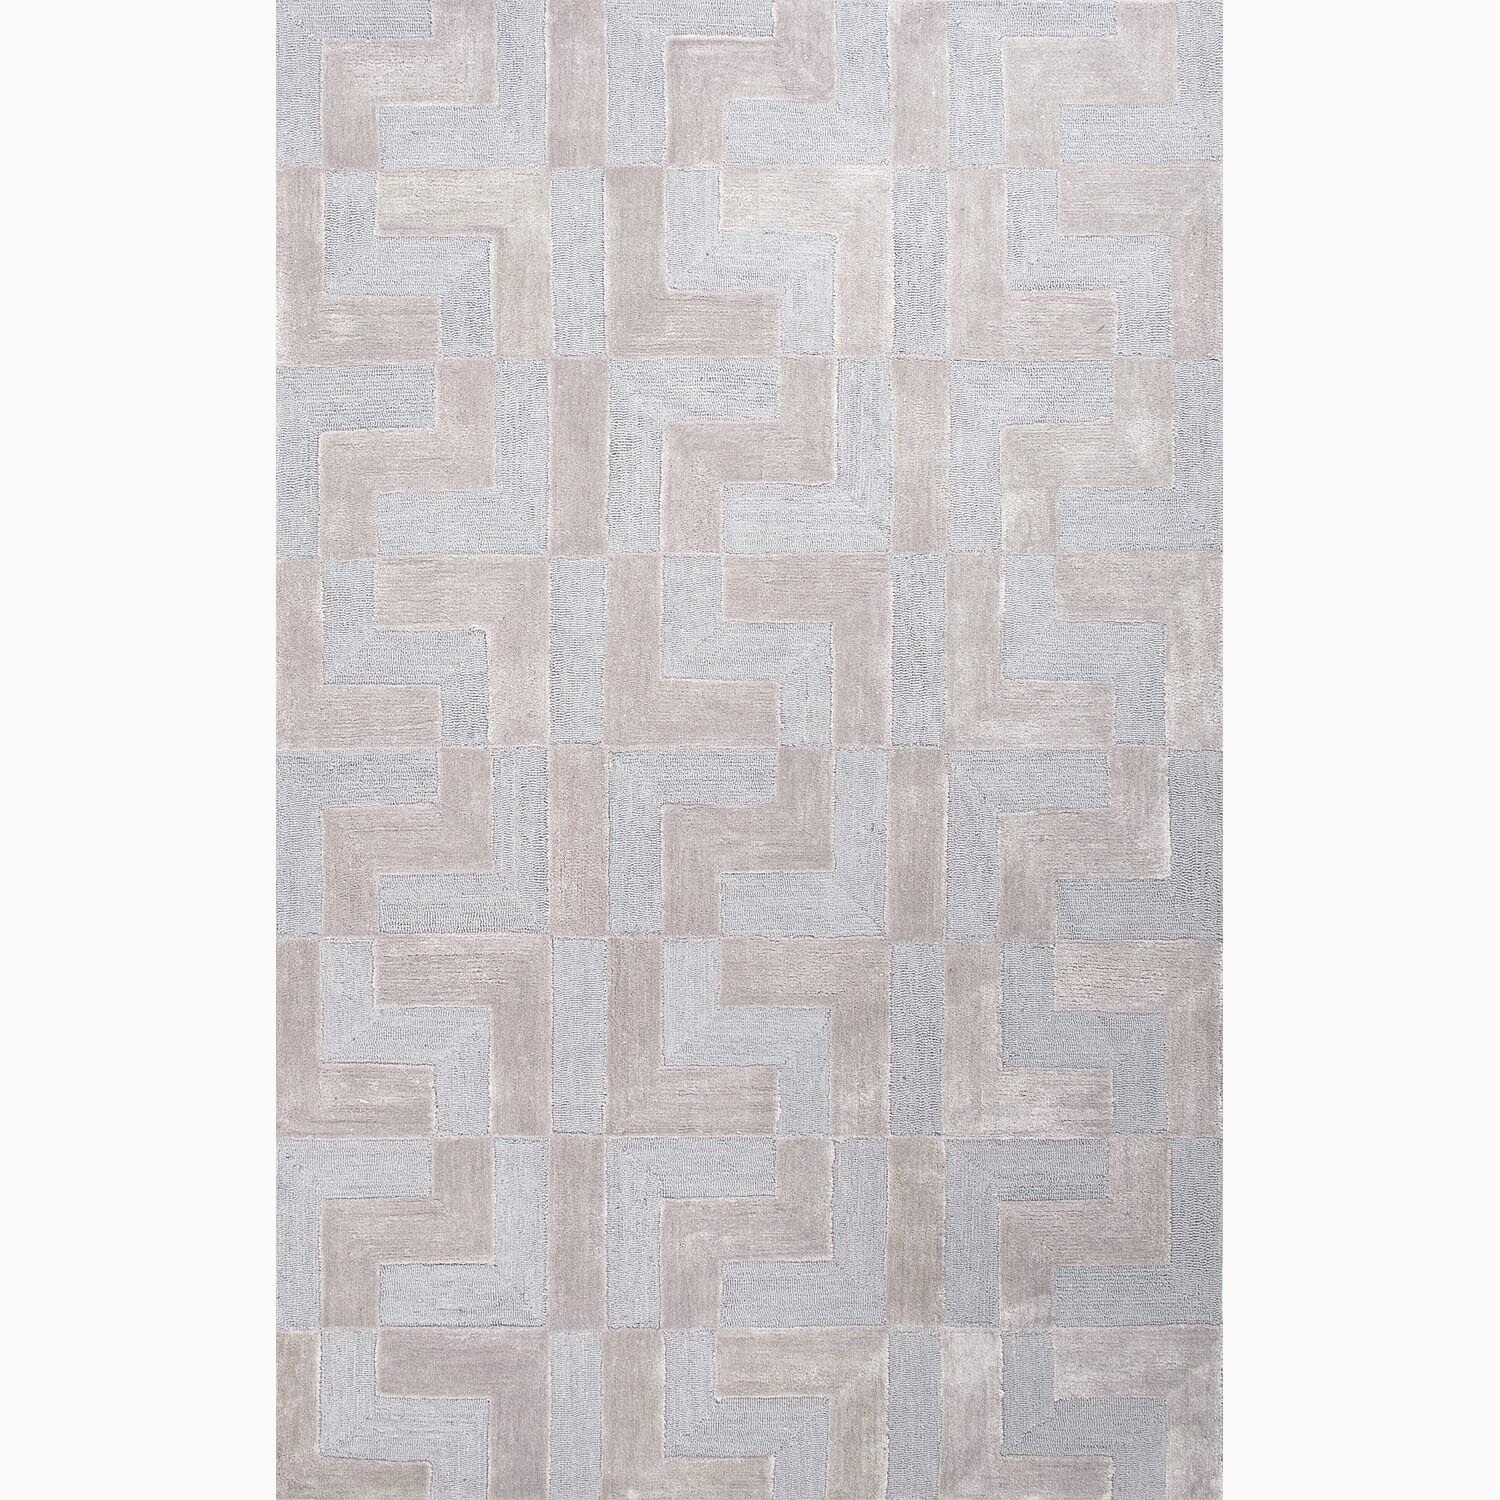 Hand made Blue/ Tan Polyester Textured Rug (8x10)